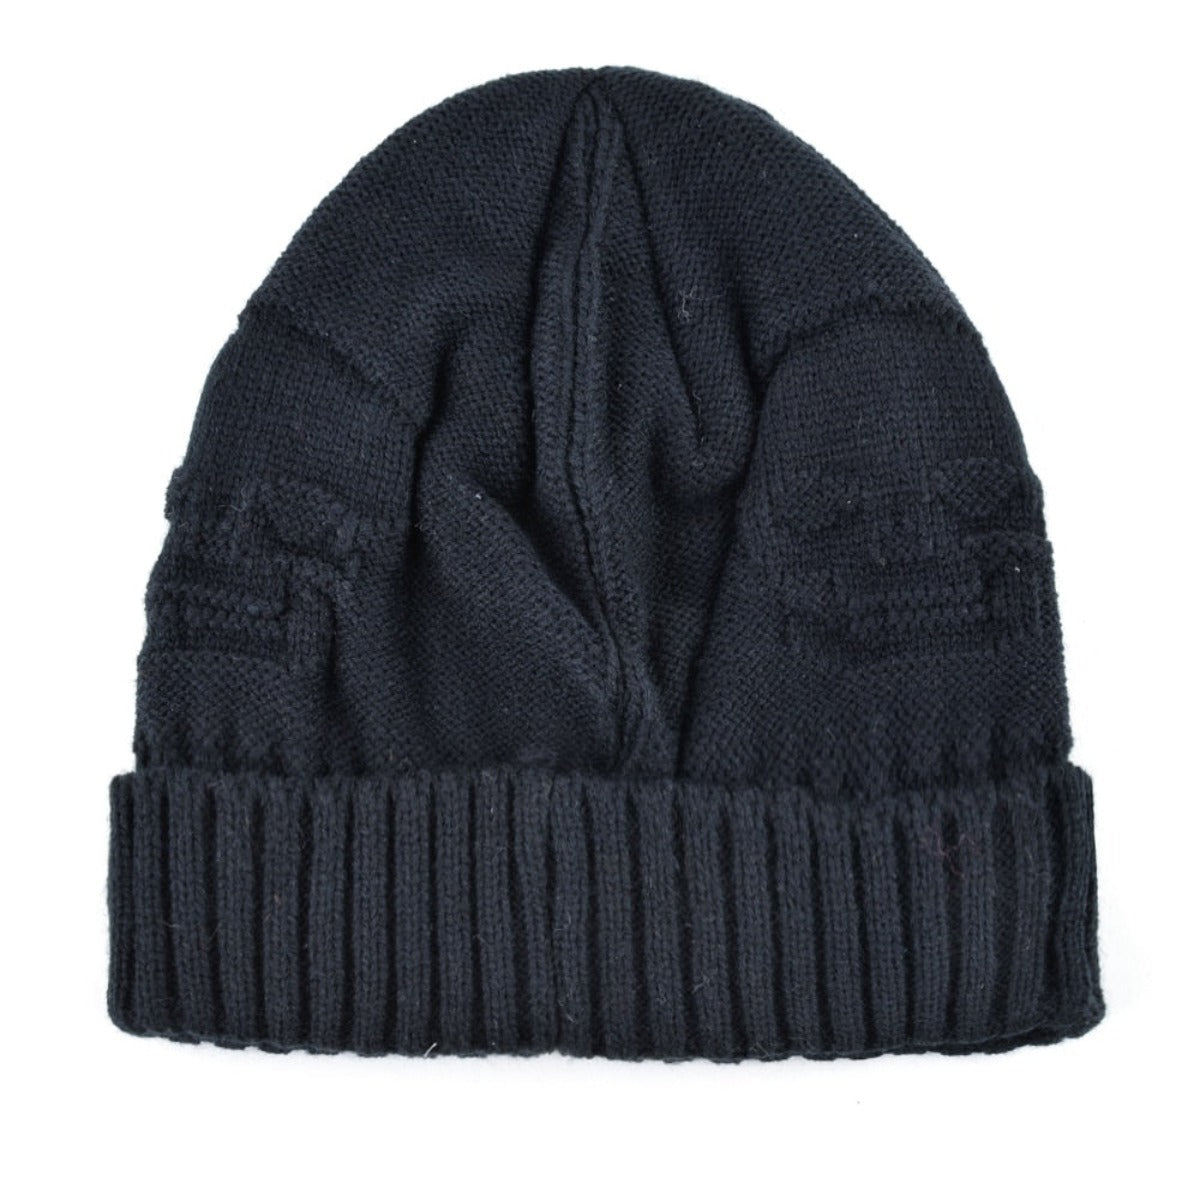 A comfort-focused Knitted Skull Pattern Beanie Hat, showcased against a crisp white background.